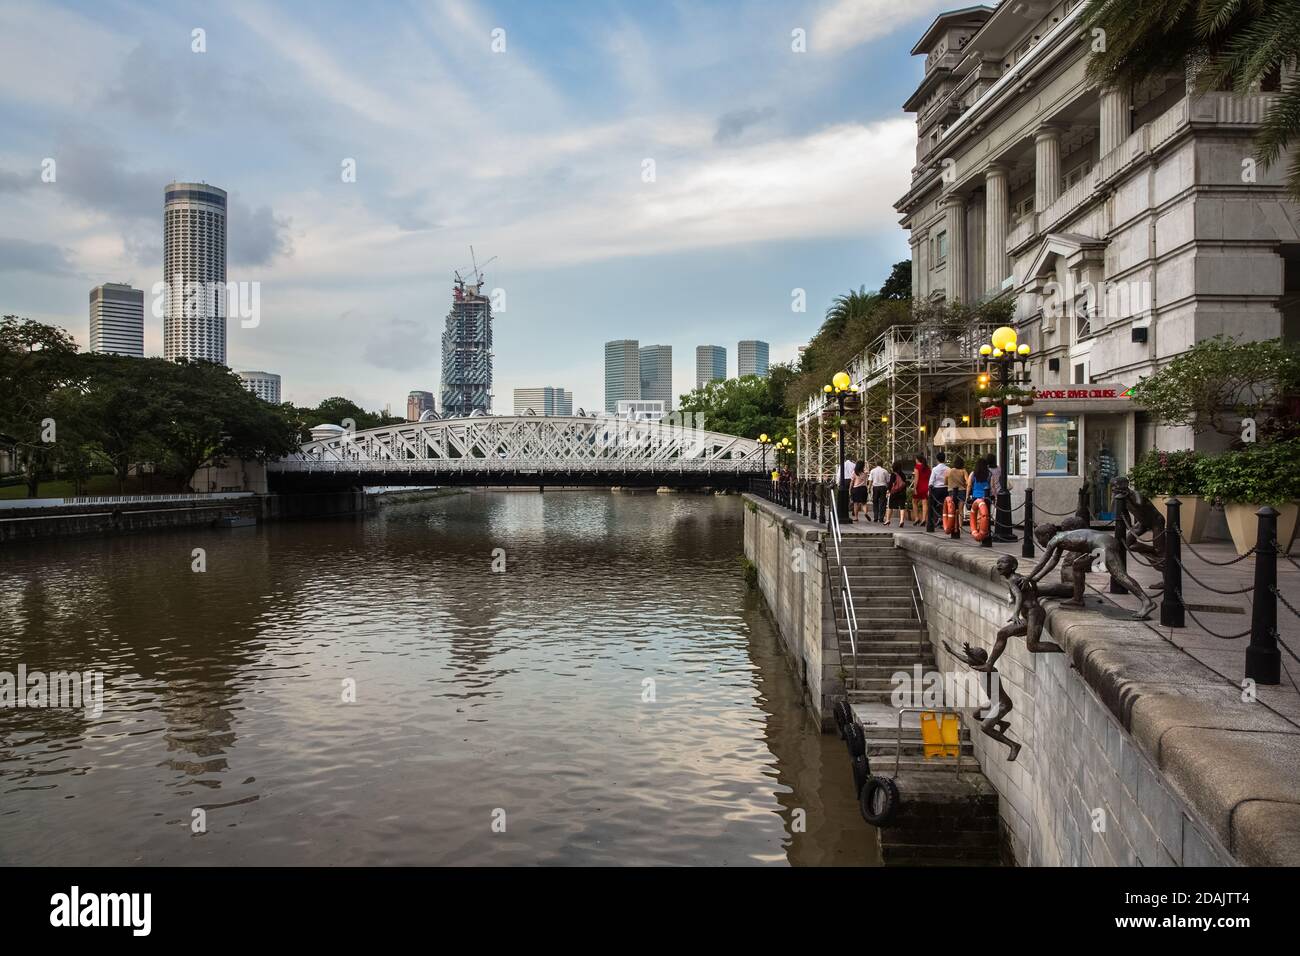 SINGAPORE - DECEMBER 9, 2014: View of the sculpture composition of the 'First Generation' sculptor by Chong Fah Cheong on the Singapore River, Distric Stock Photo